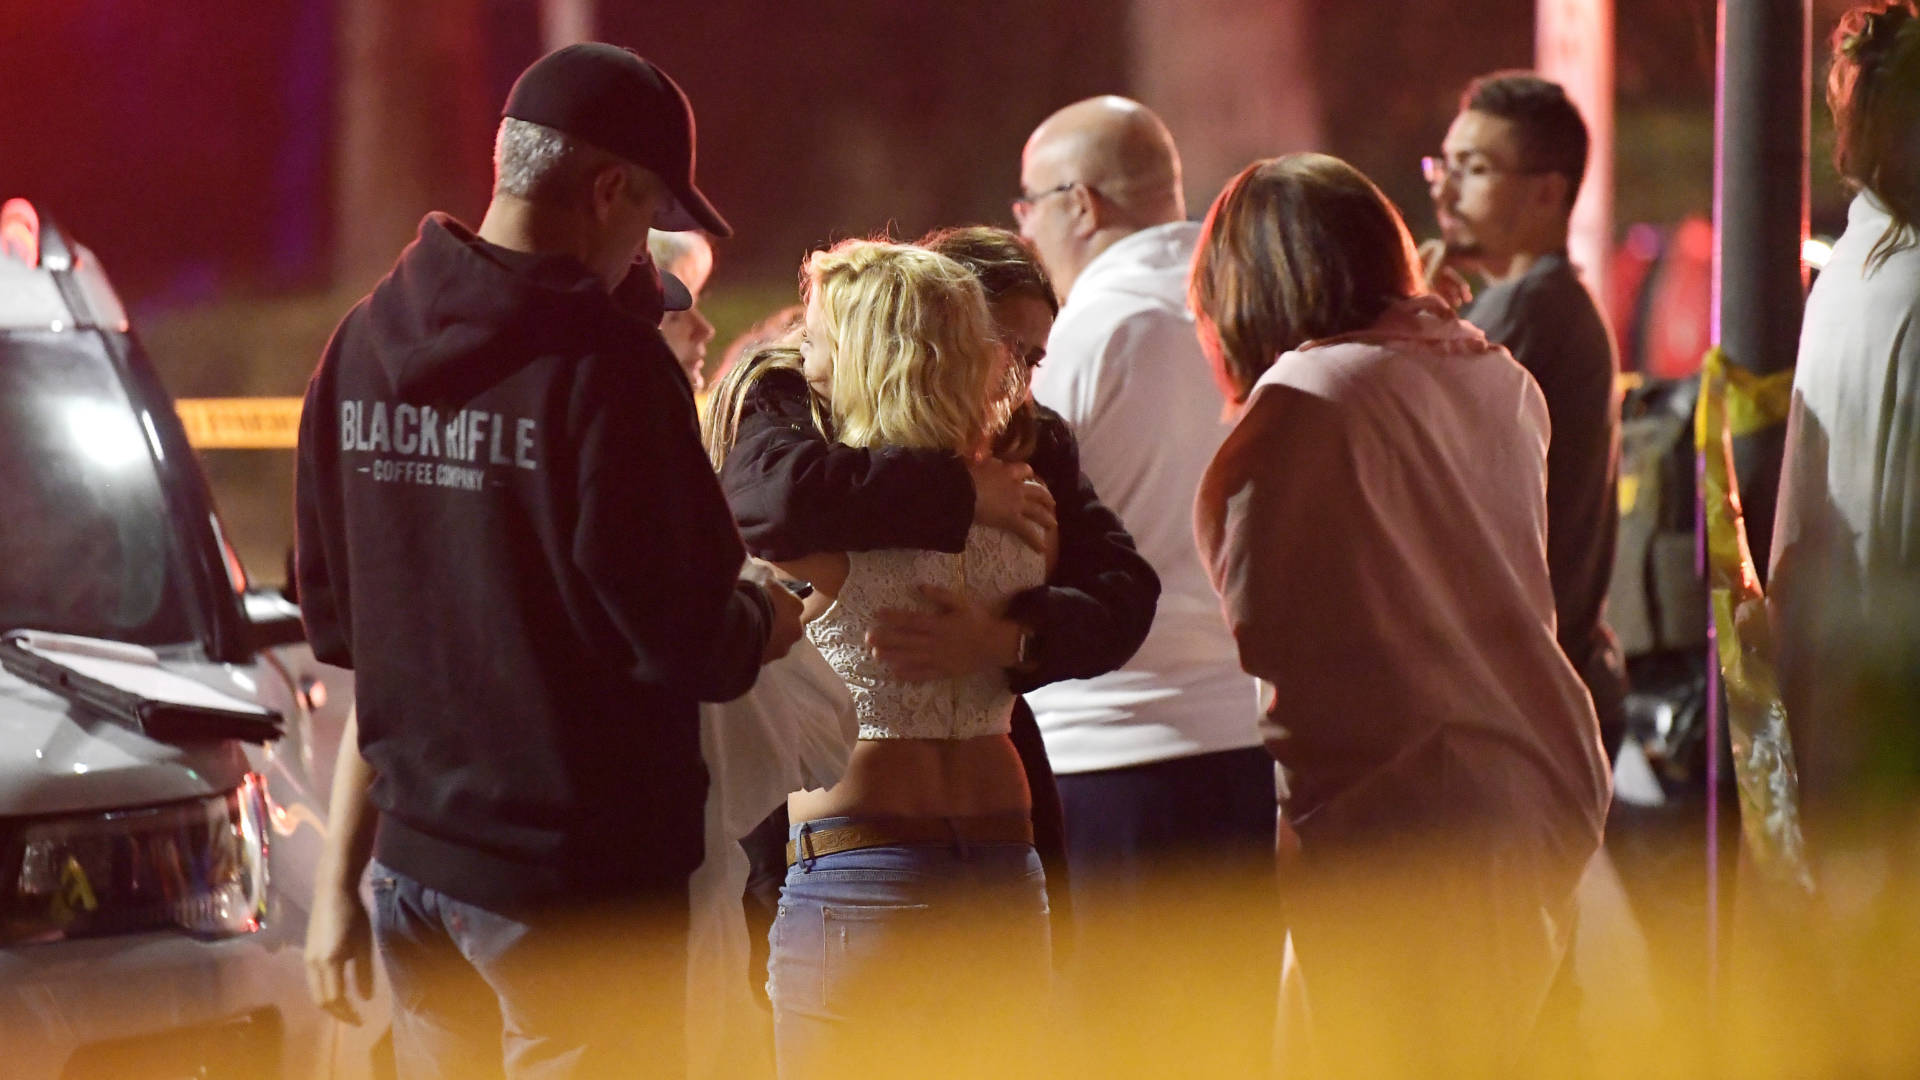 People comfort each other outside a bar in Thousand Oaks, where a gunman opened fire and killed 12. Mark J. Terrill/AP